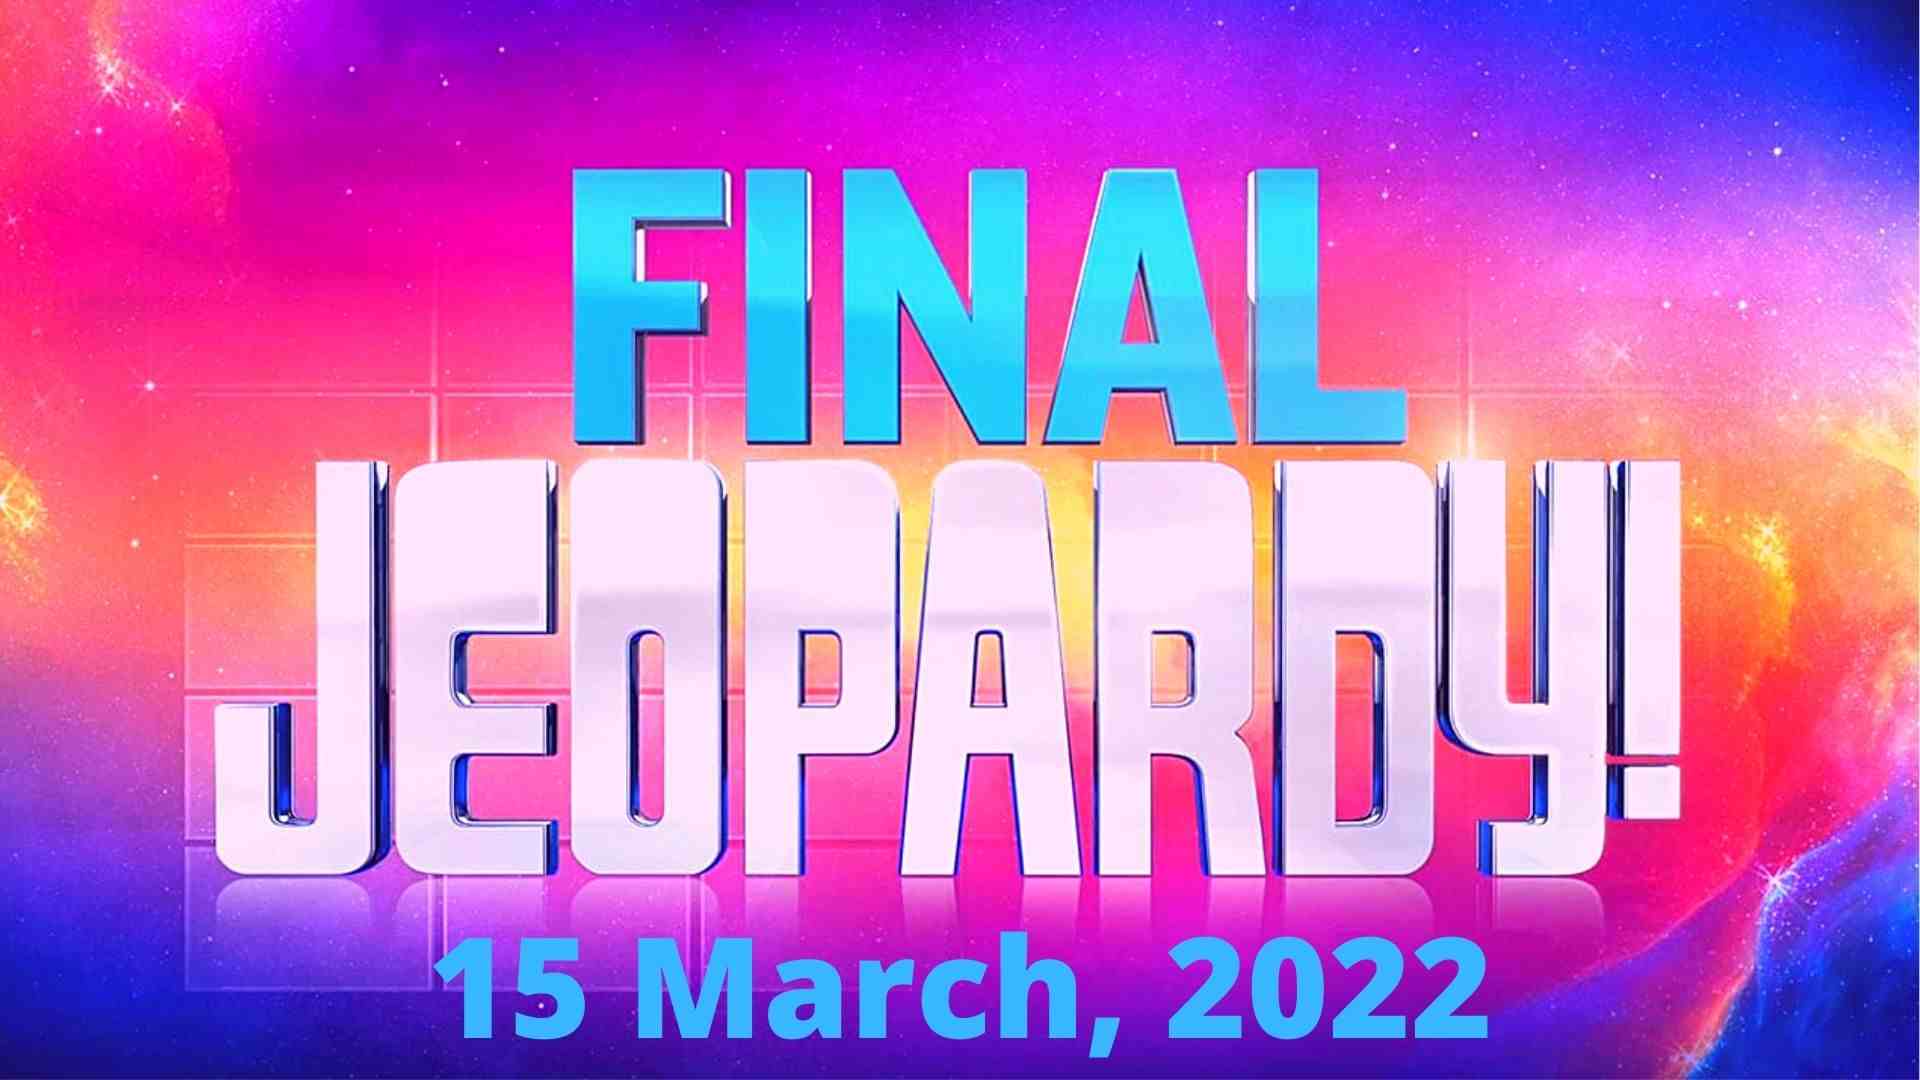 March 15 Jeopardy image